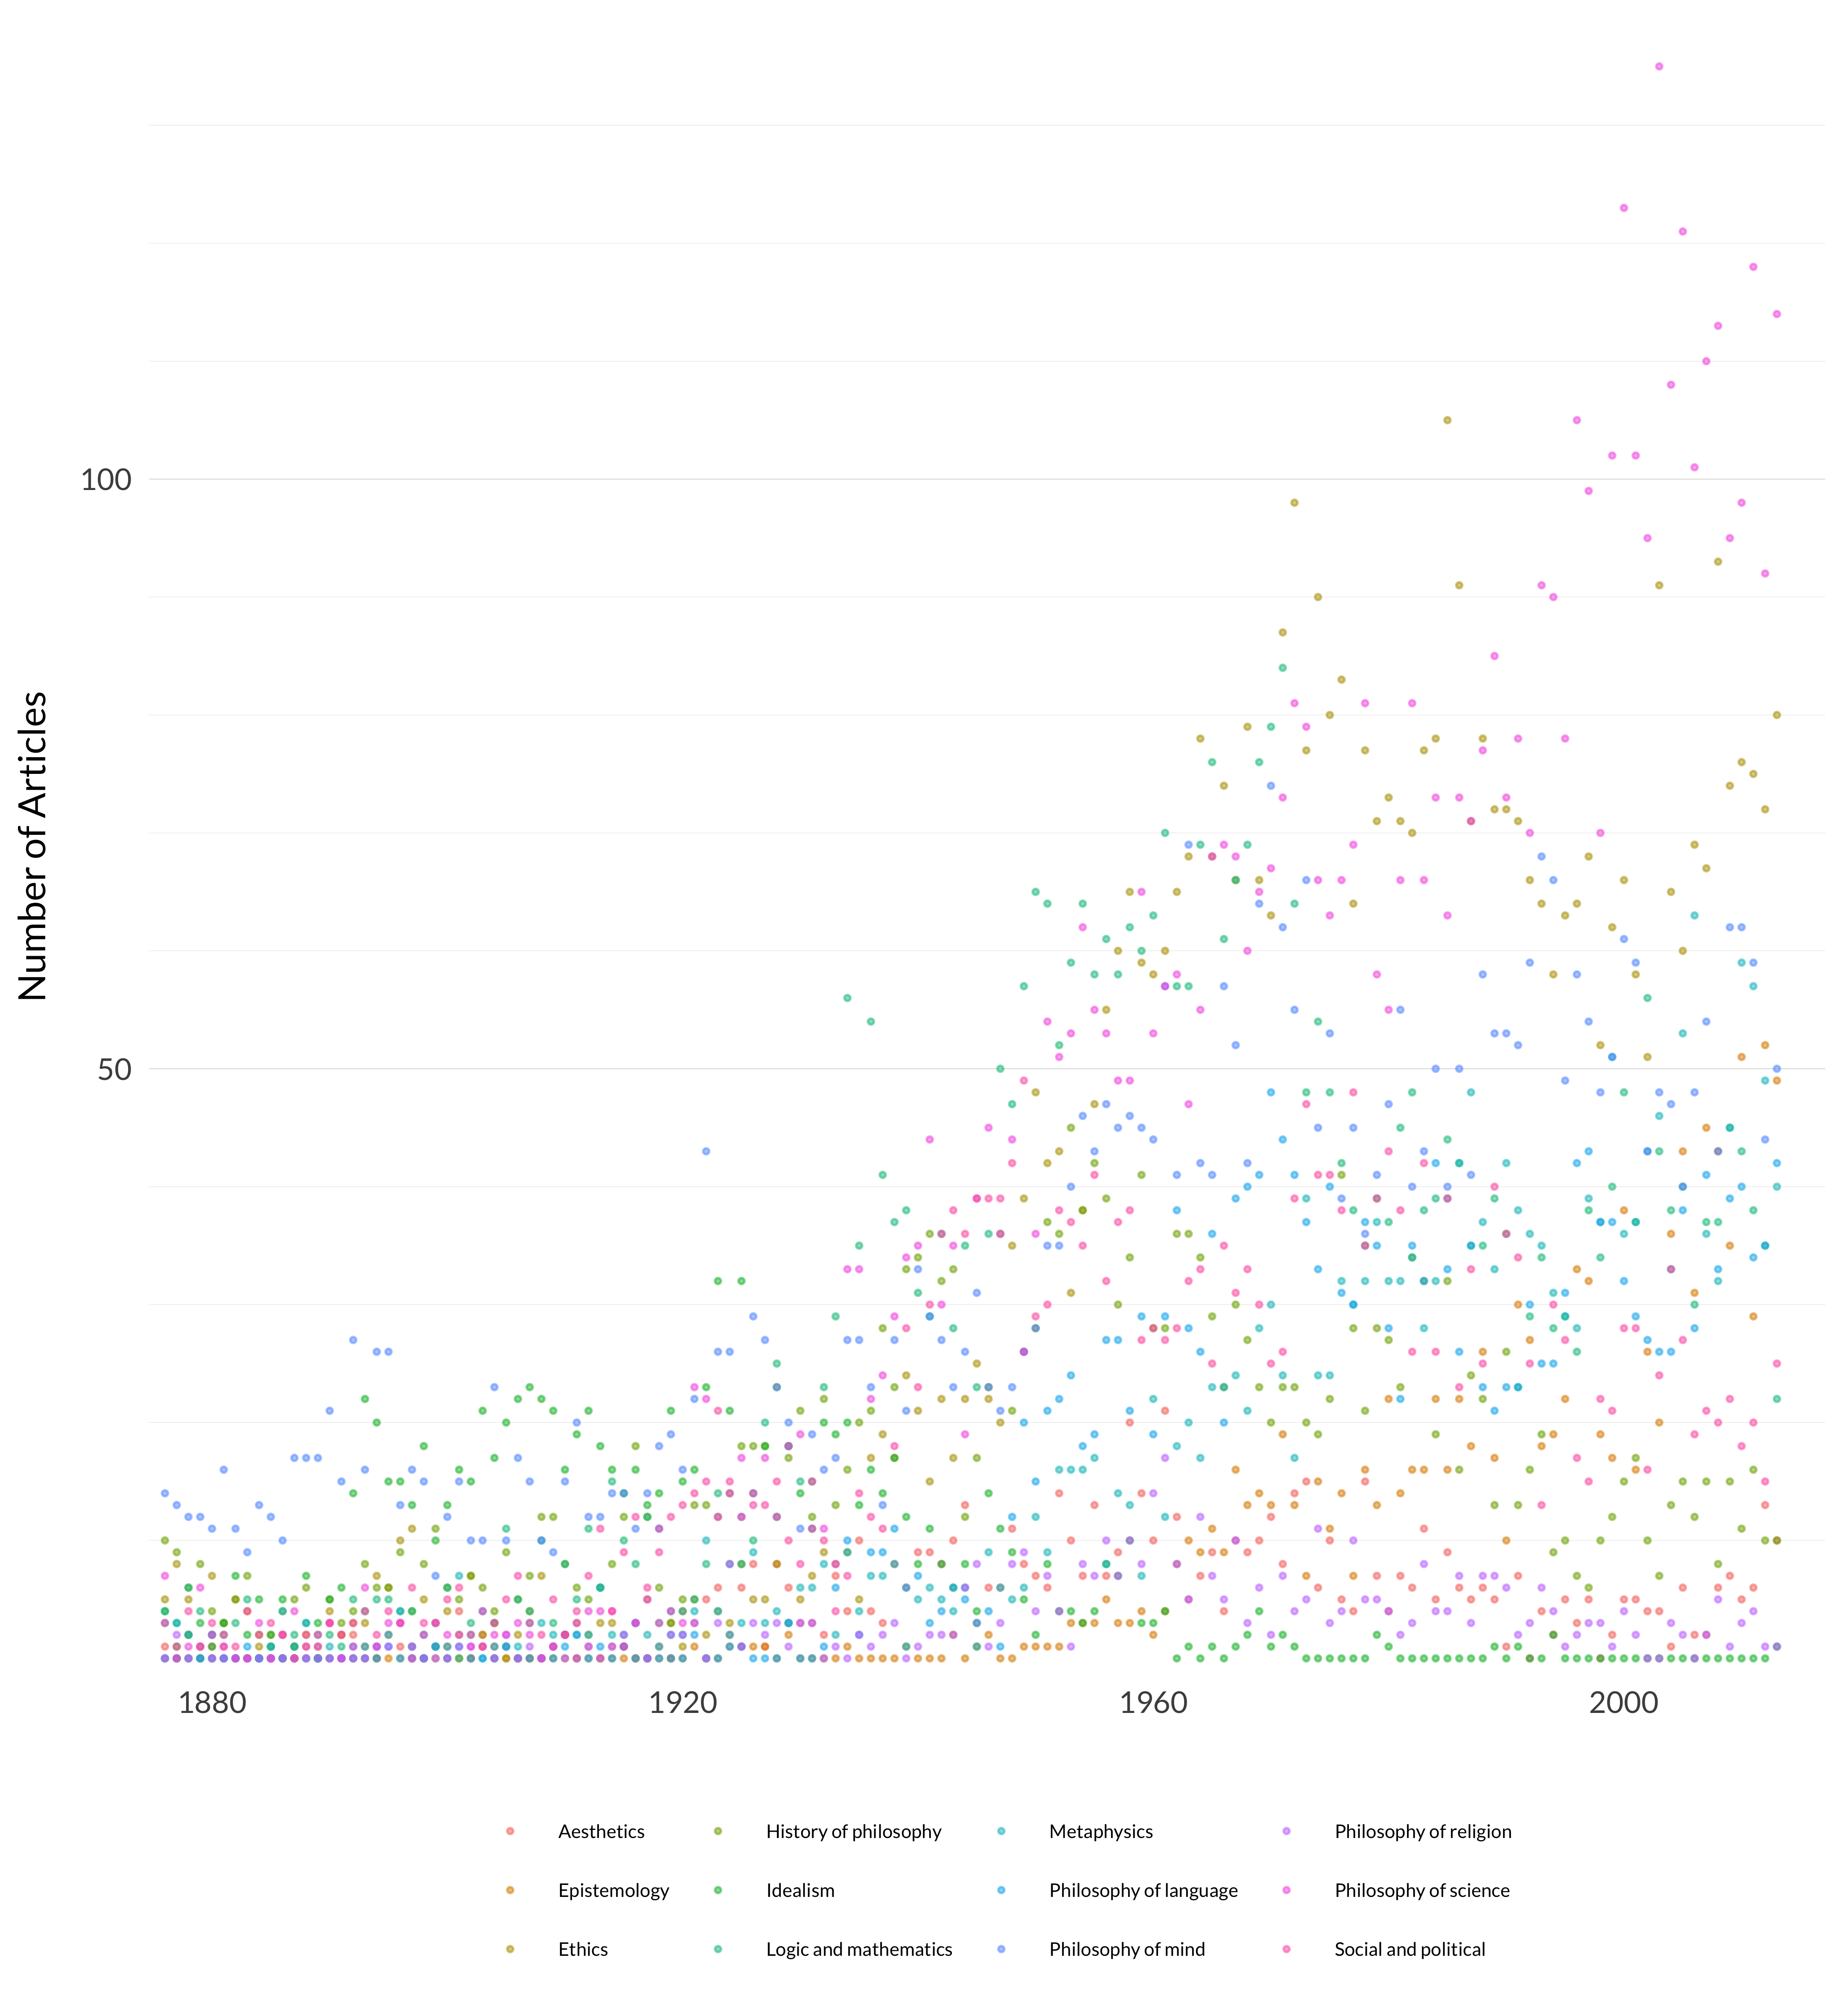 A scatterplot showing the raw number of articles in each year in each of the 12 categories. The graph is too busy to see much usable information. The data for this graph, and the next, are in Table C.1 in appendix C.